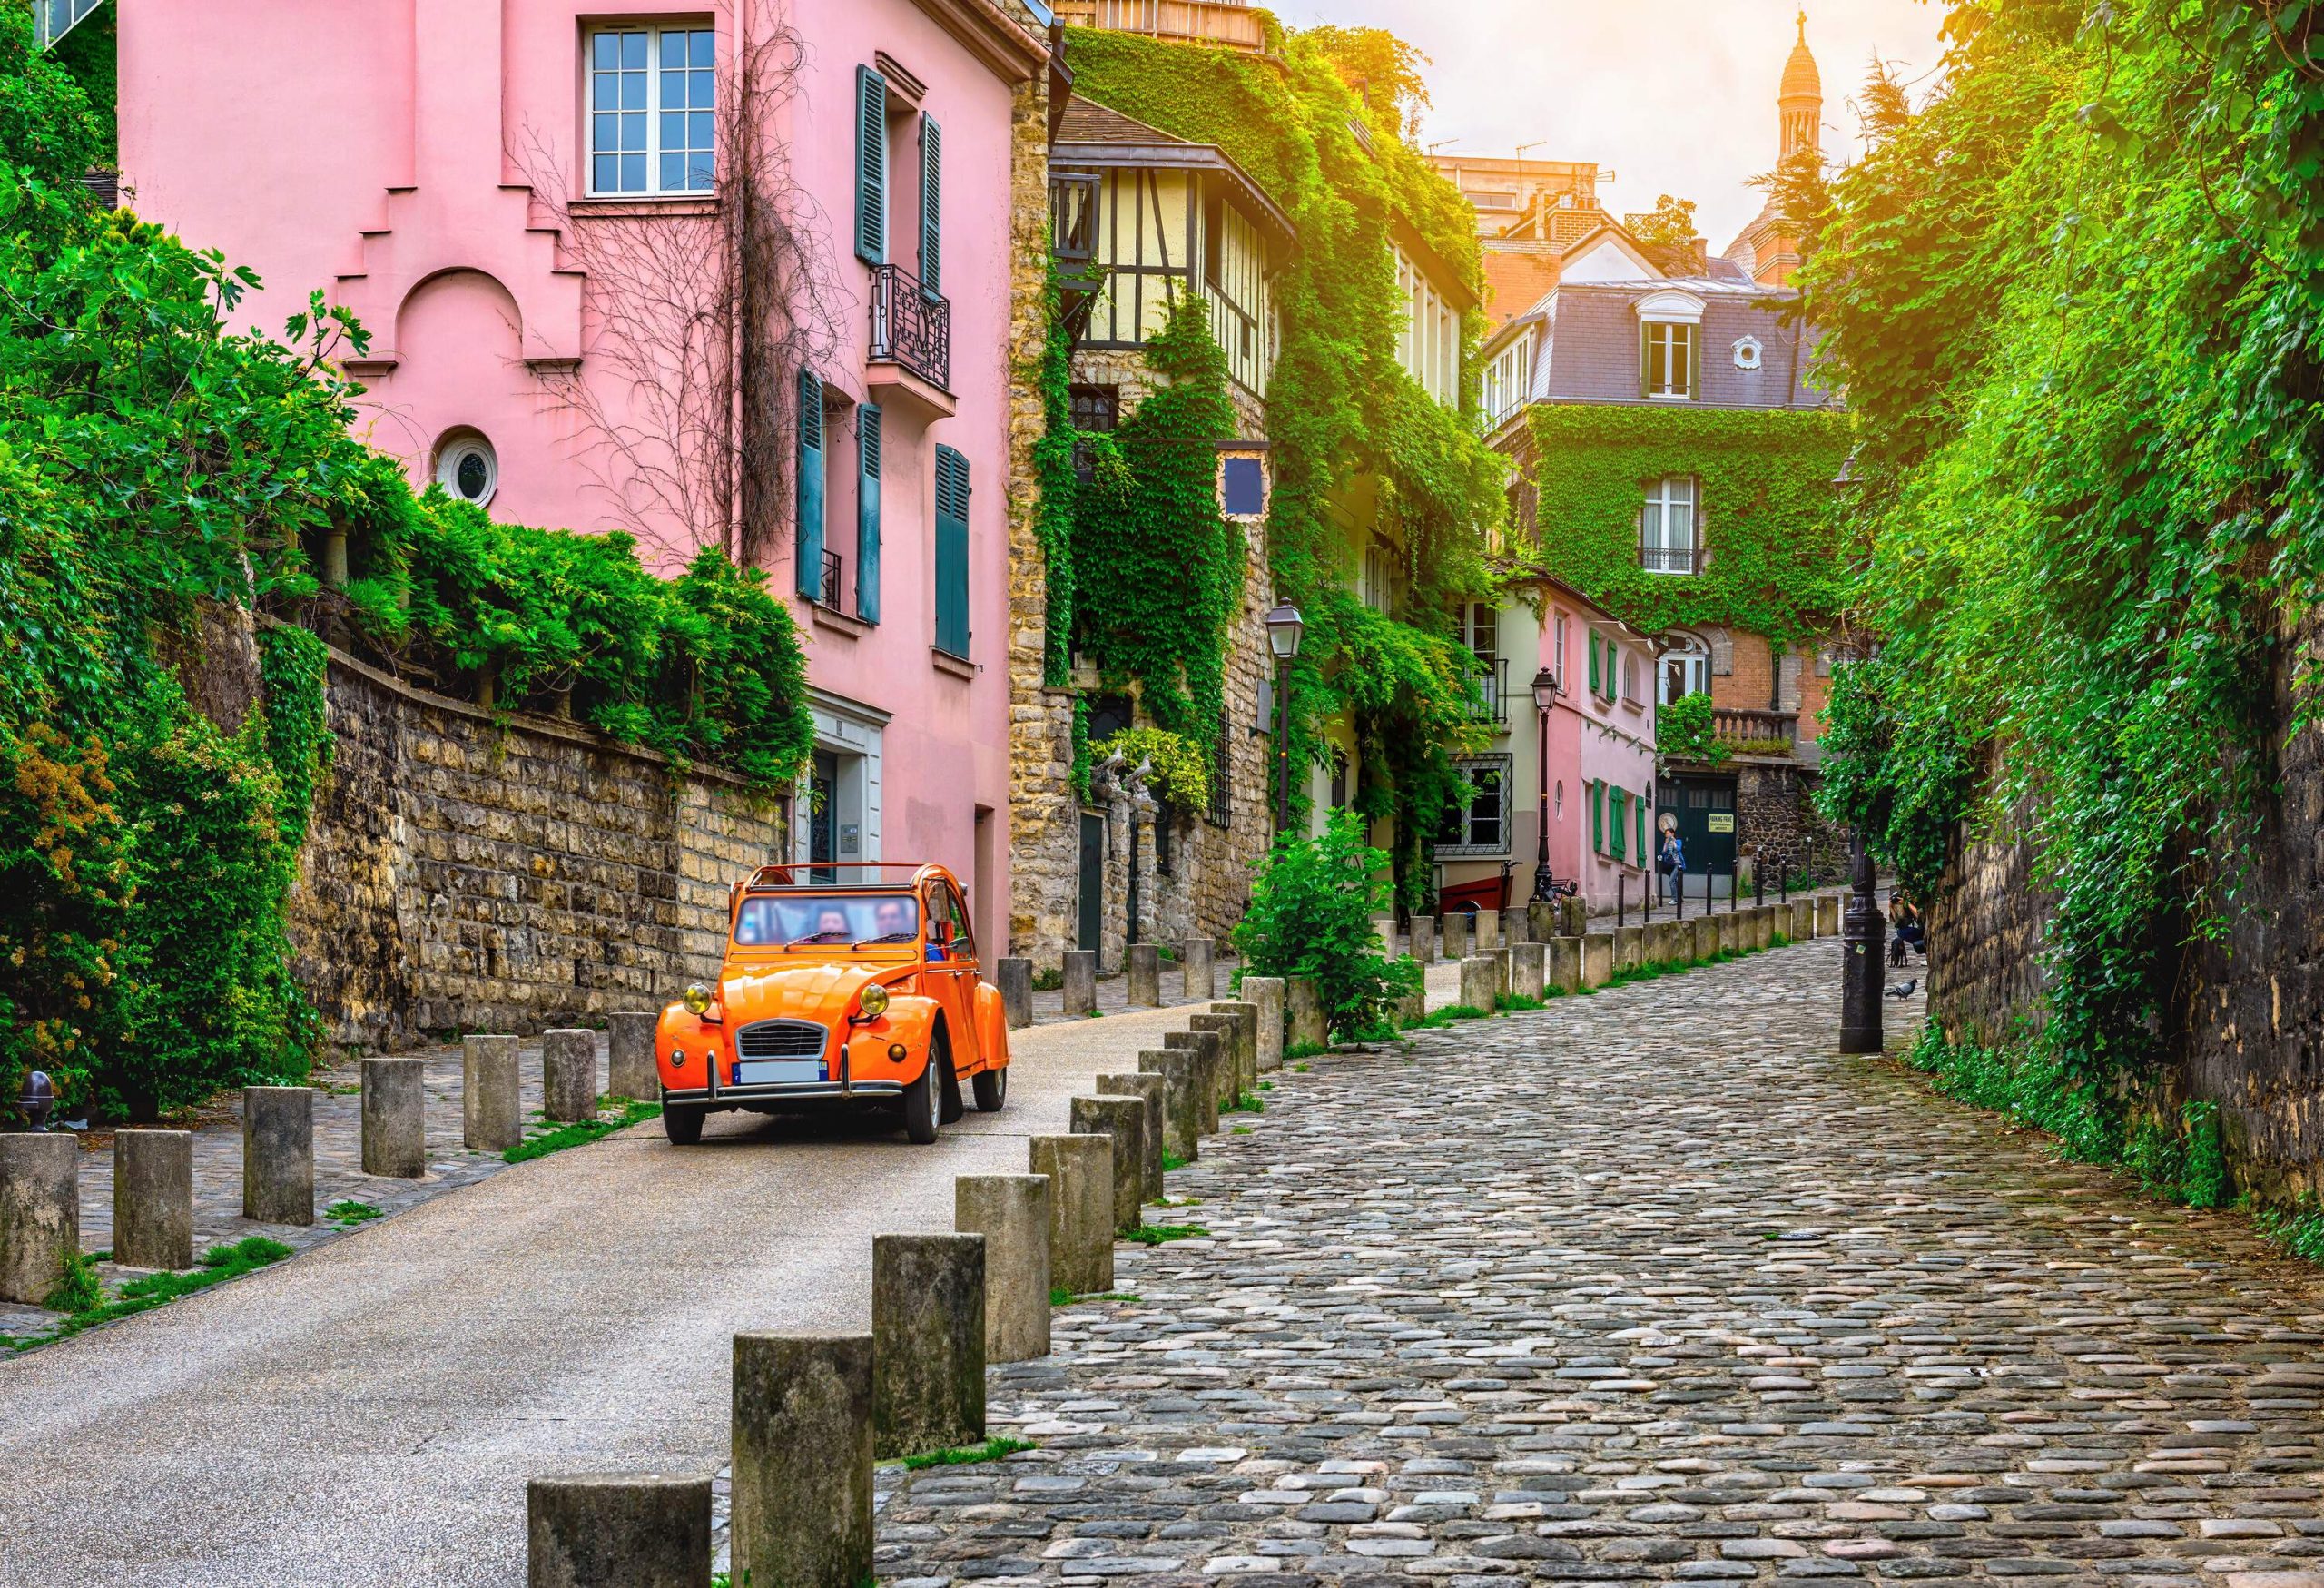 An orange vintage car running down a steep road along a cobbled sidewalk and colourful houses.